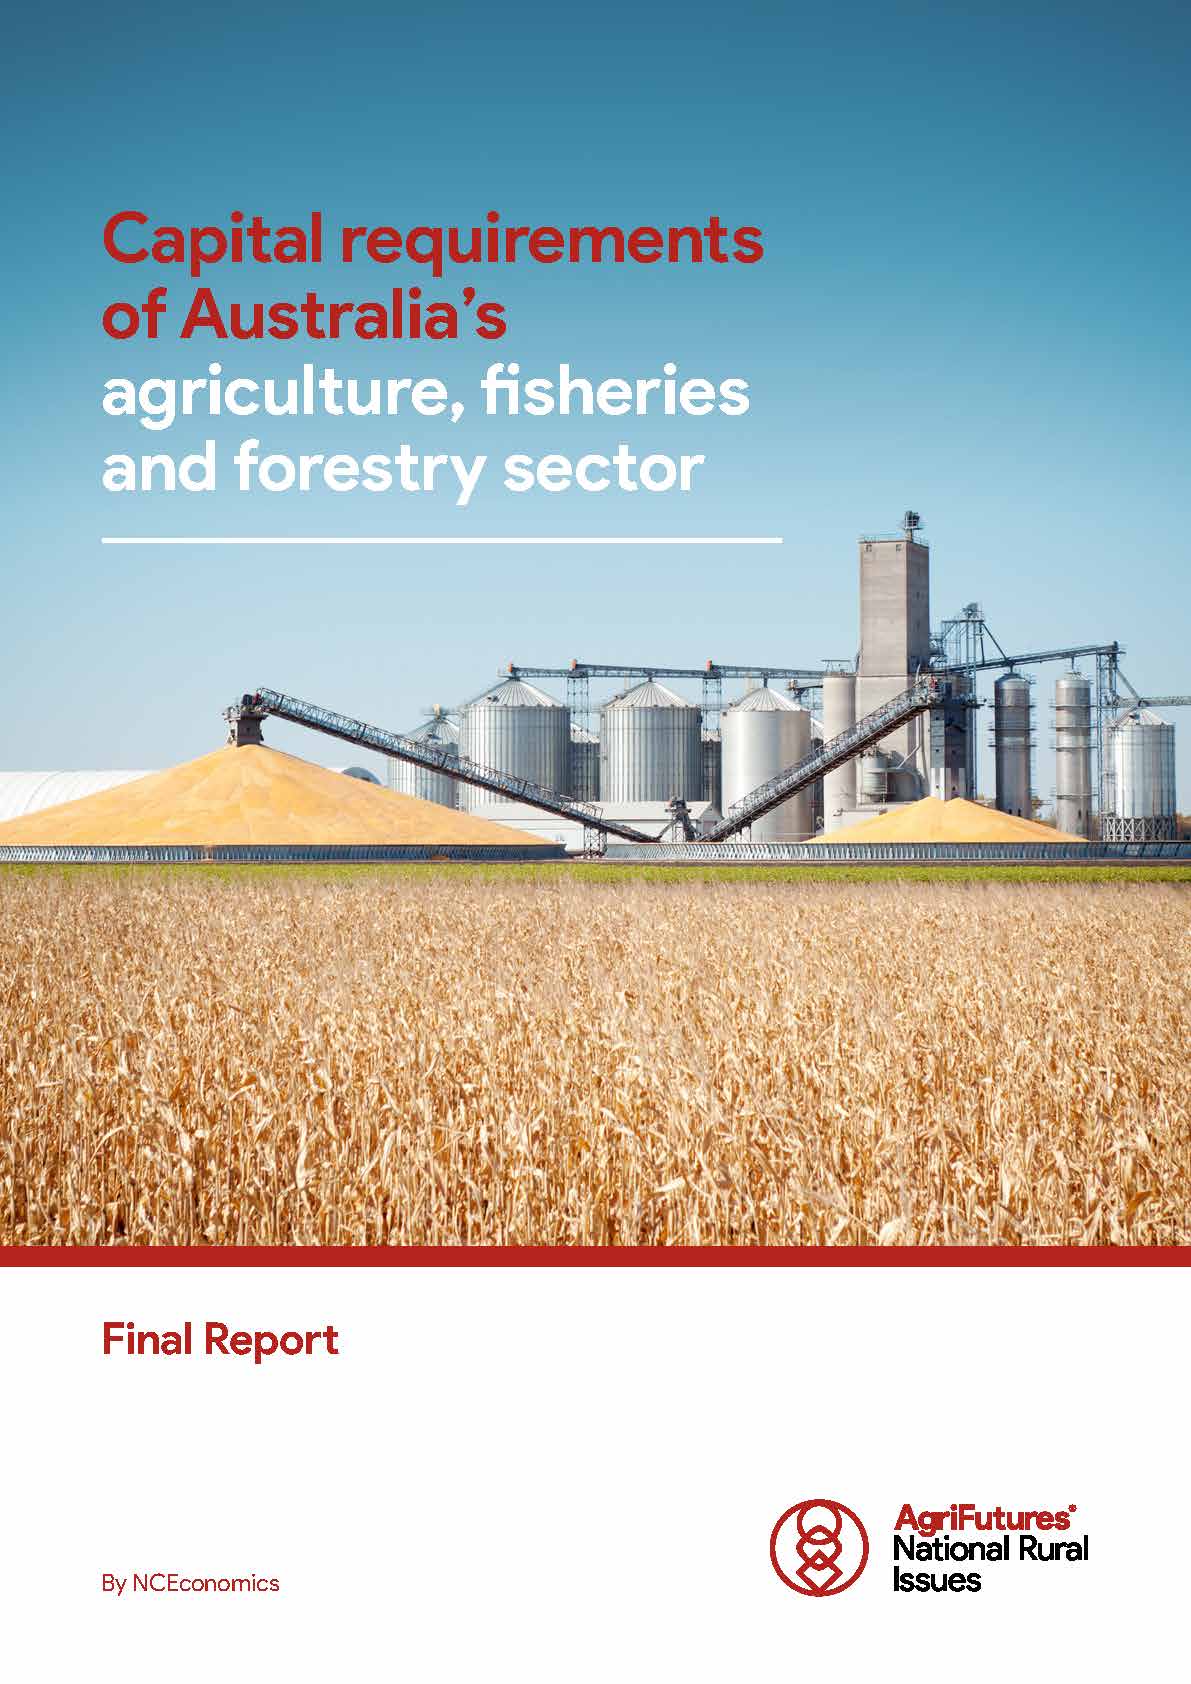 Capital requirements of Australia’s agriculture, fisheries and forestry sector - image